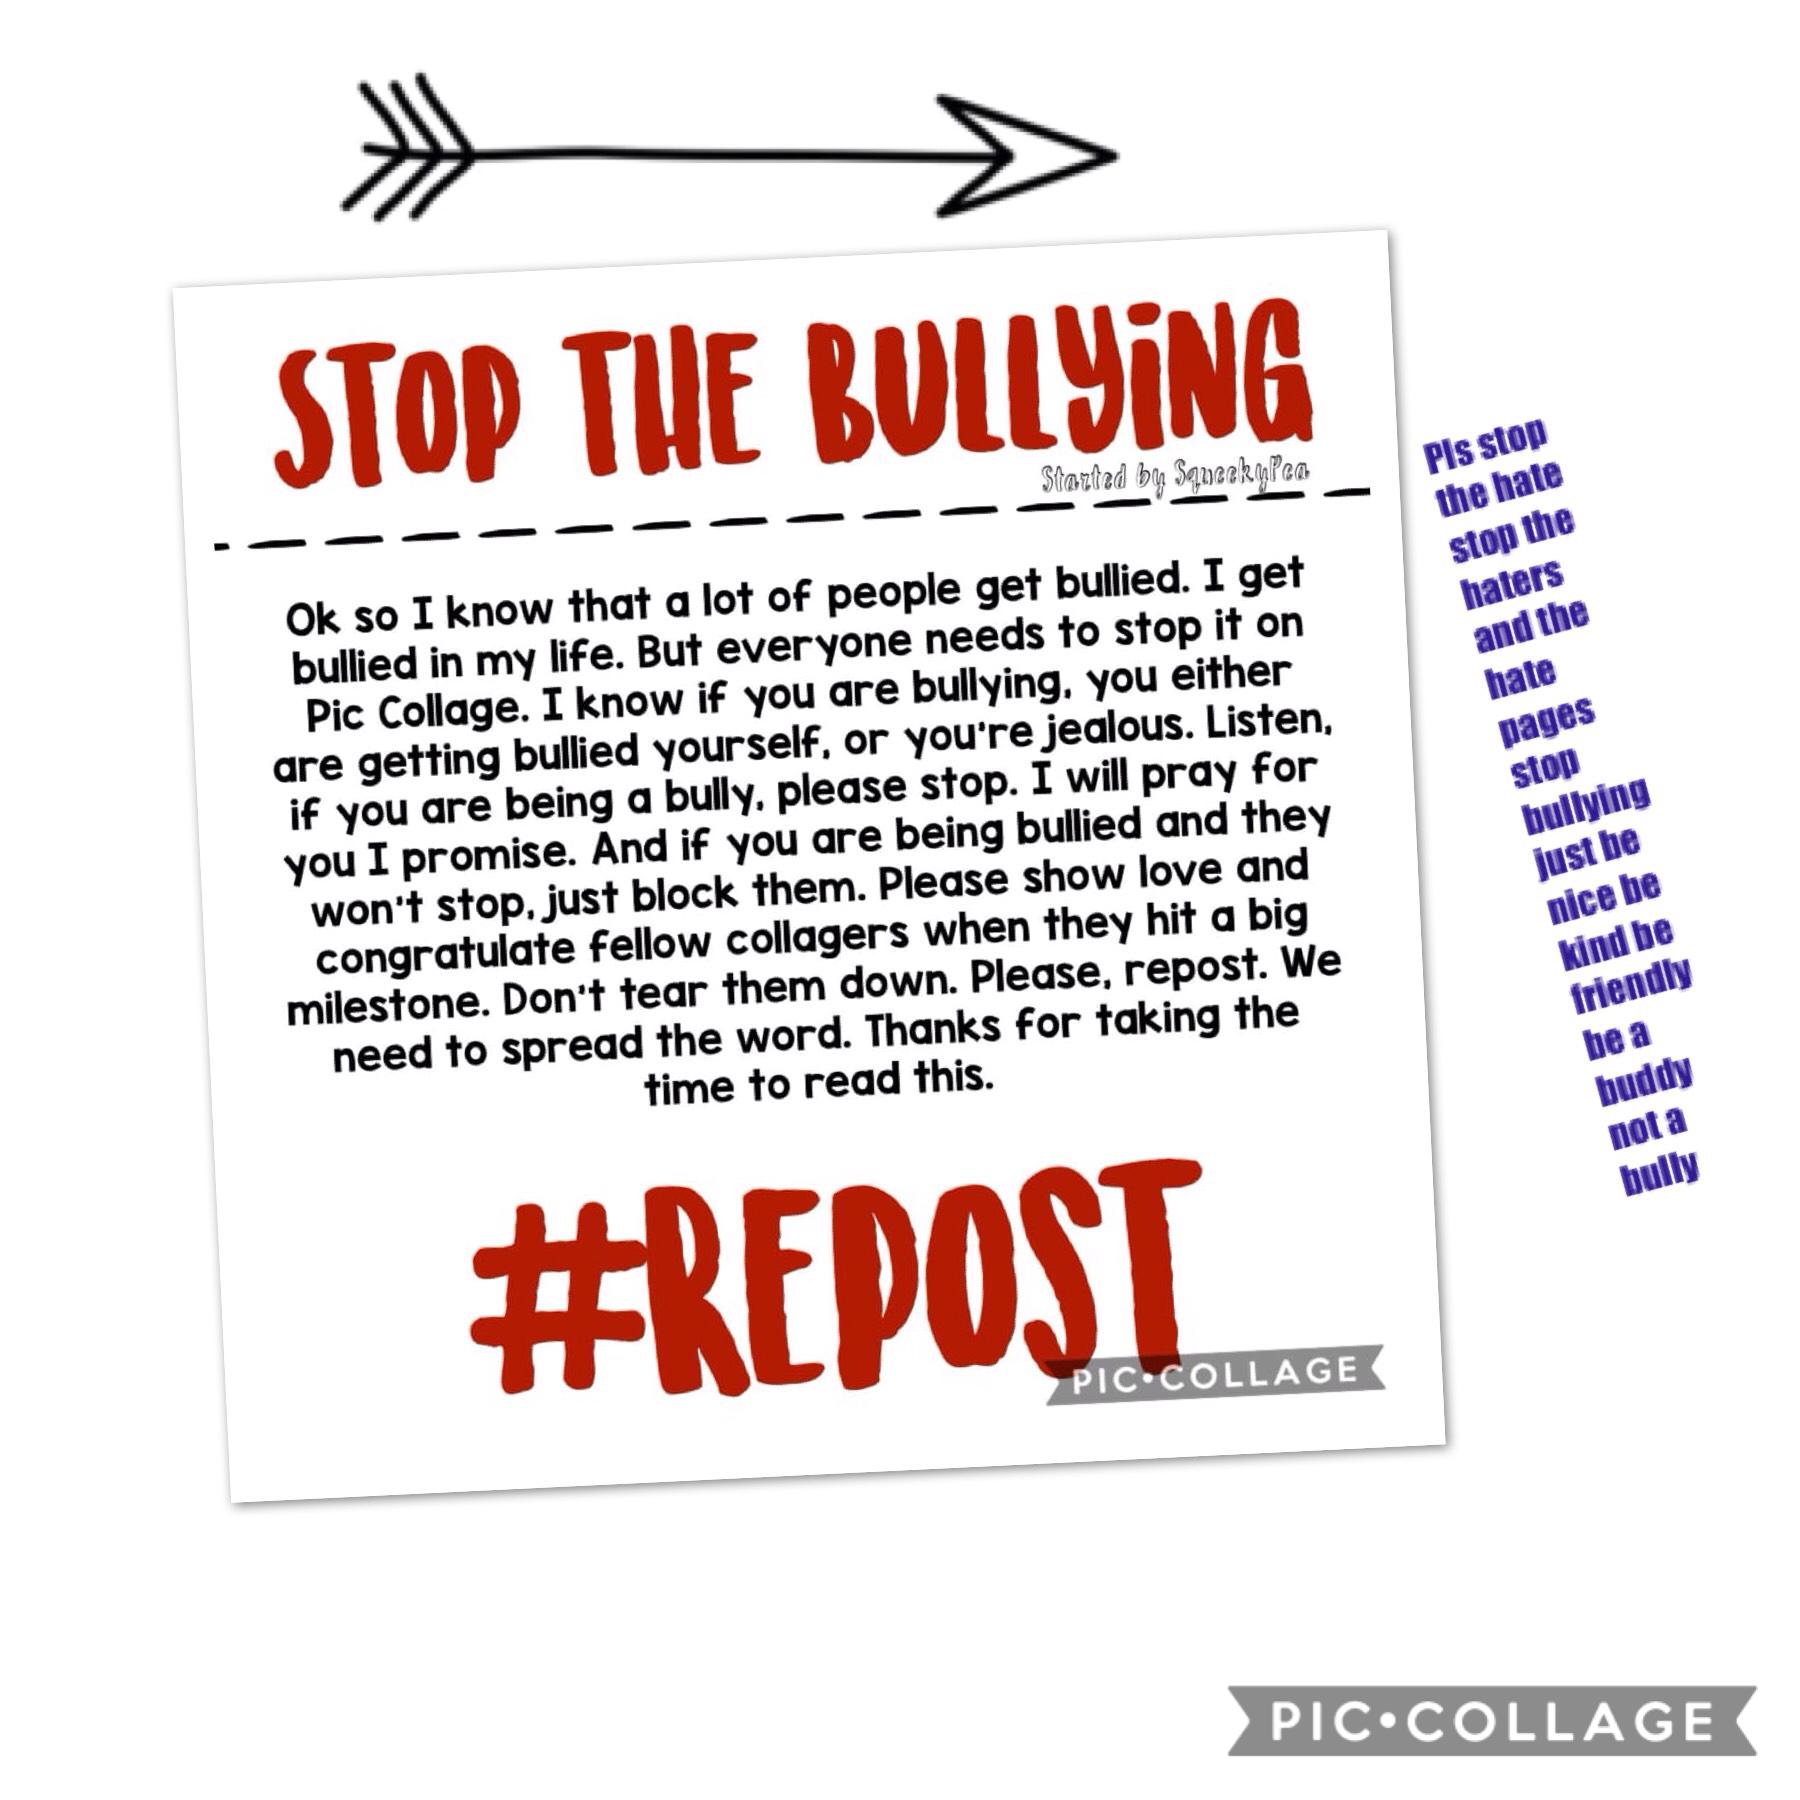 Just stop


Be a buddy not a bully!!! 